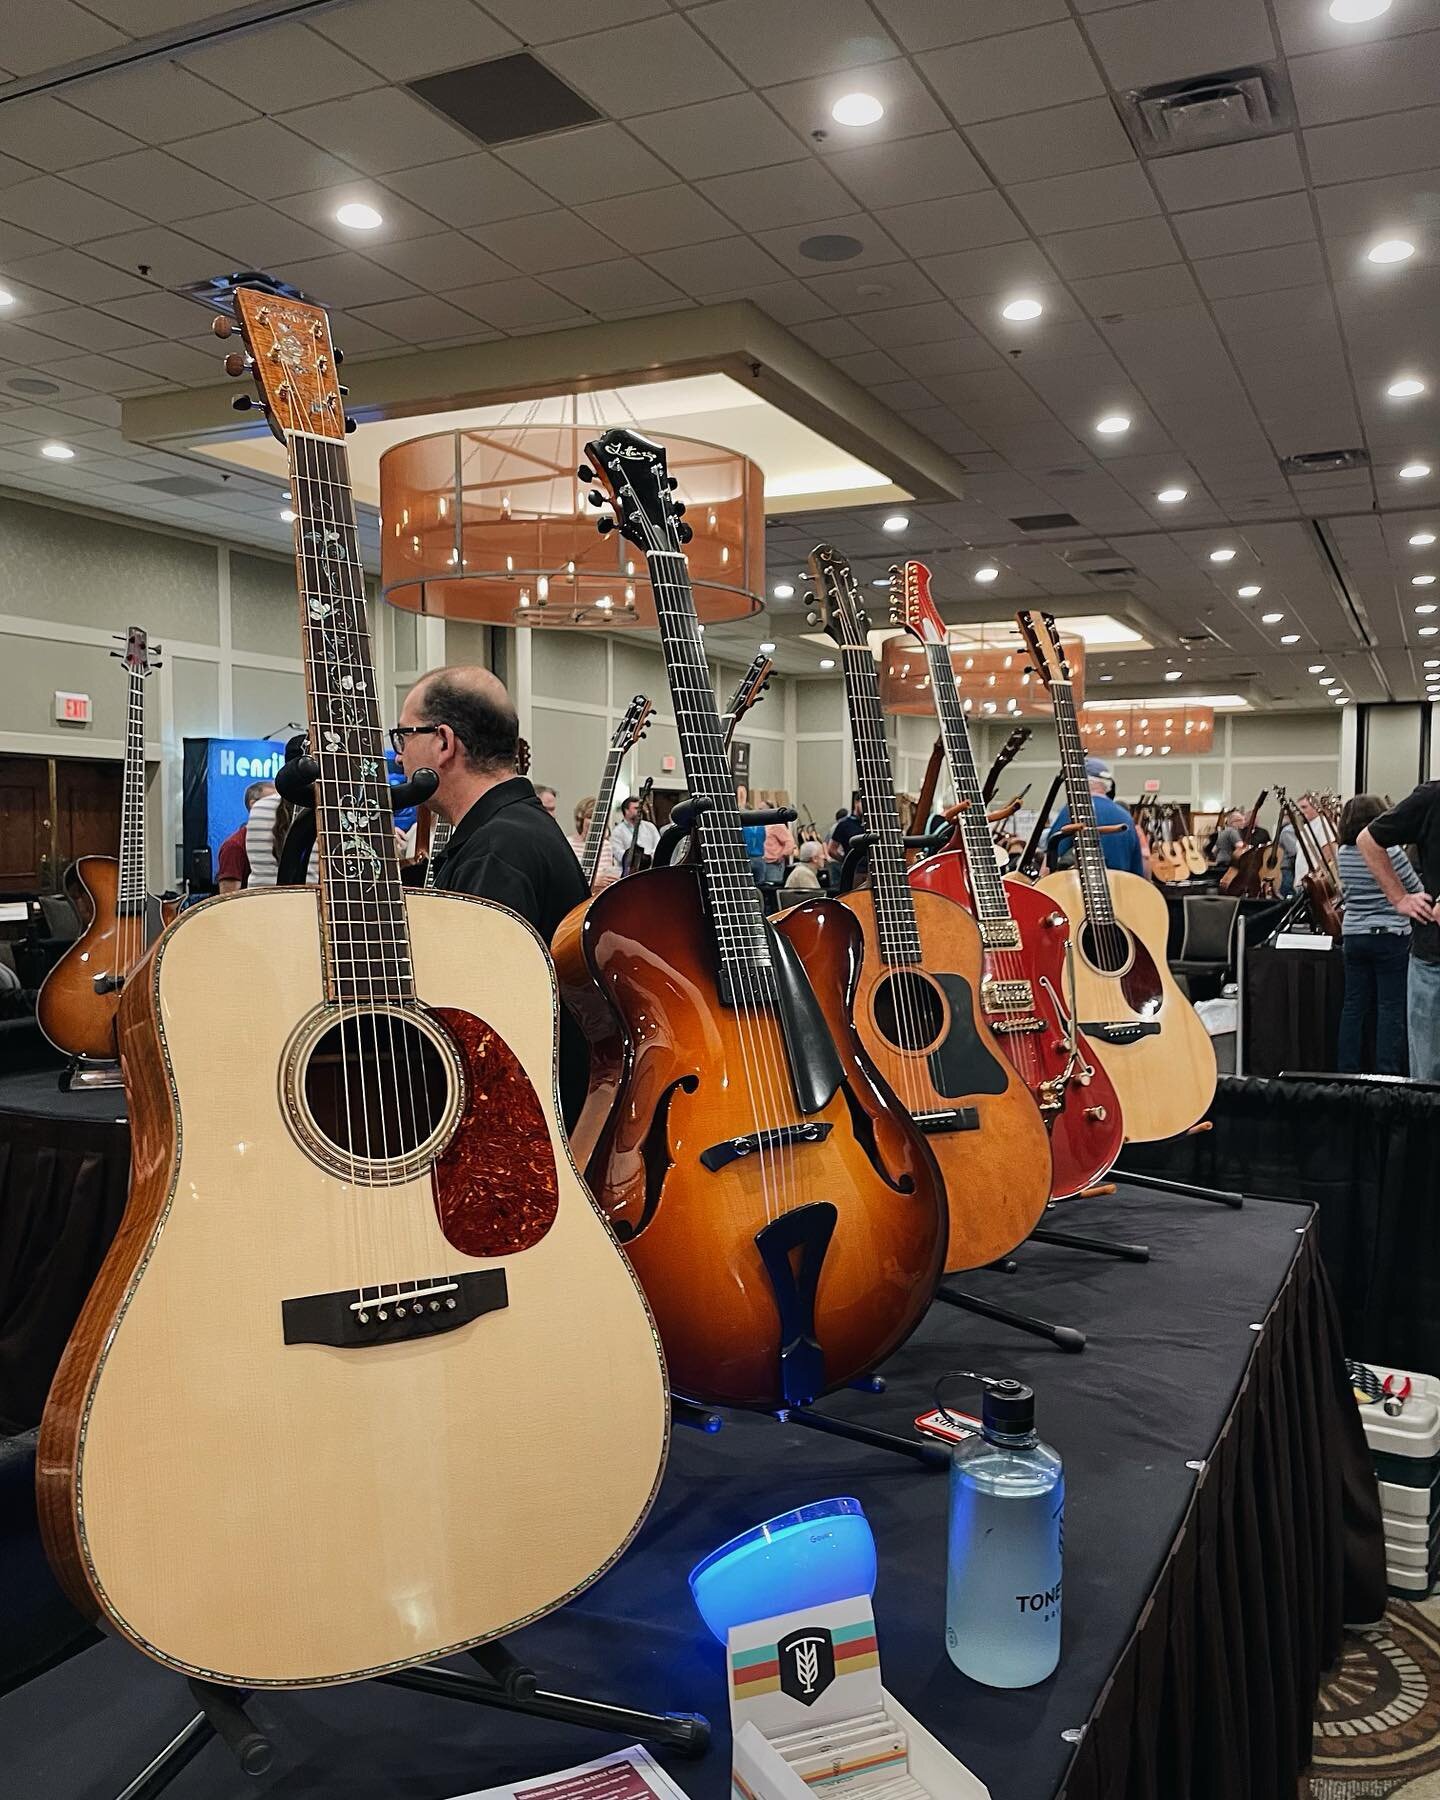 I had such a great time seeing friends and meeting new people while showing my guitars at the Artisan Guitar Show this weekend. Thank you to Eli at @tonewoodbrewing for the friendship and John at @artisanguitarshow. It was an honor to be among such g